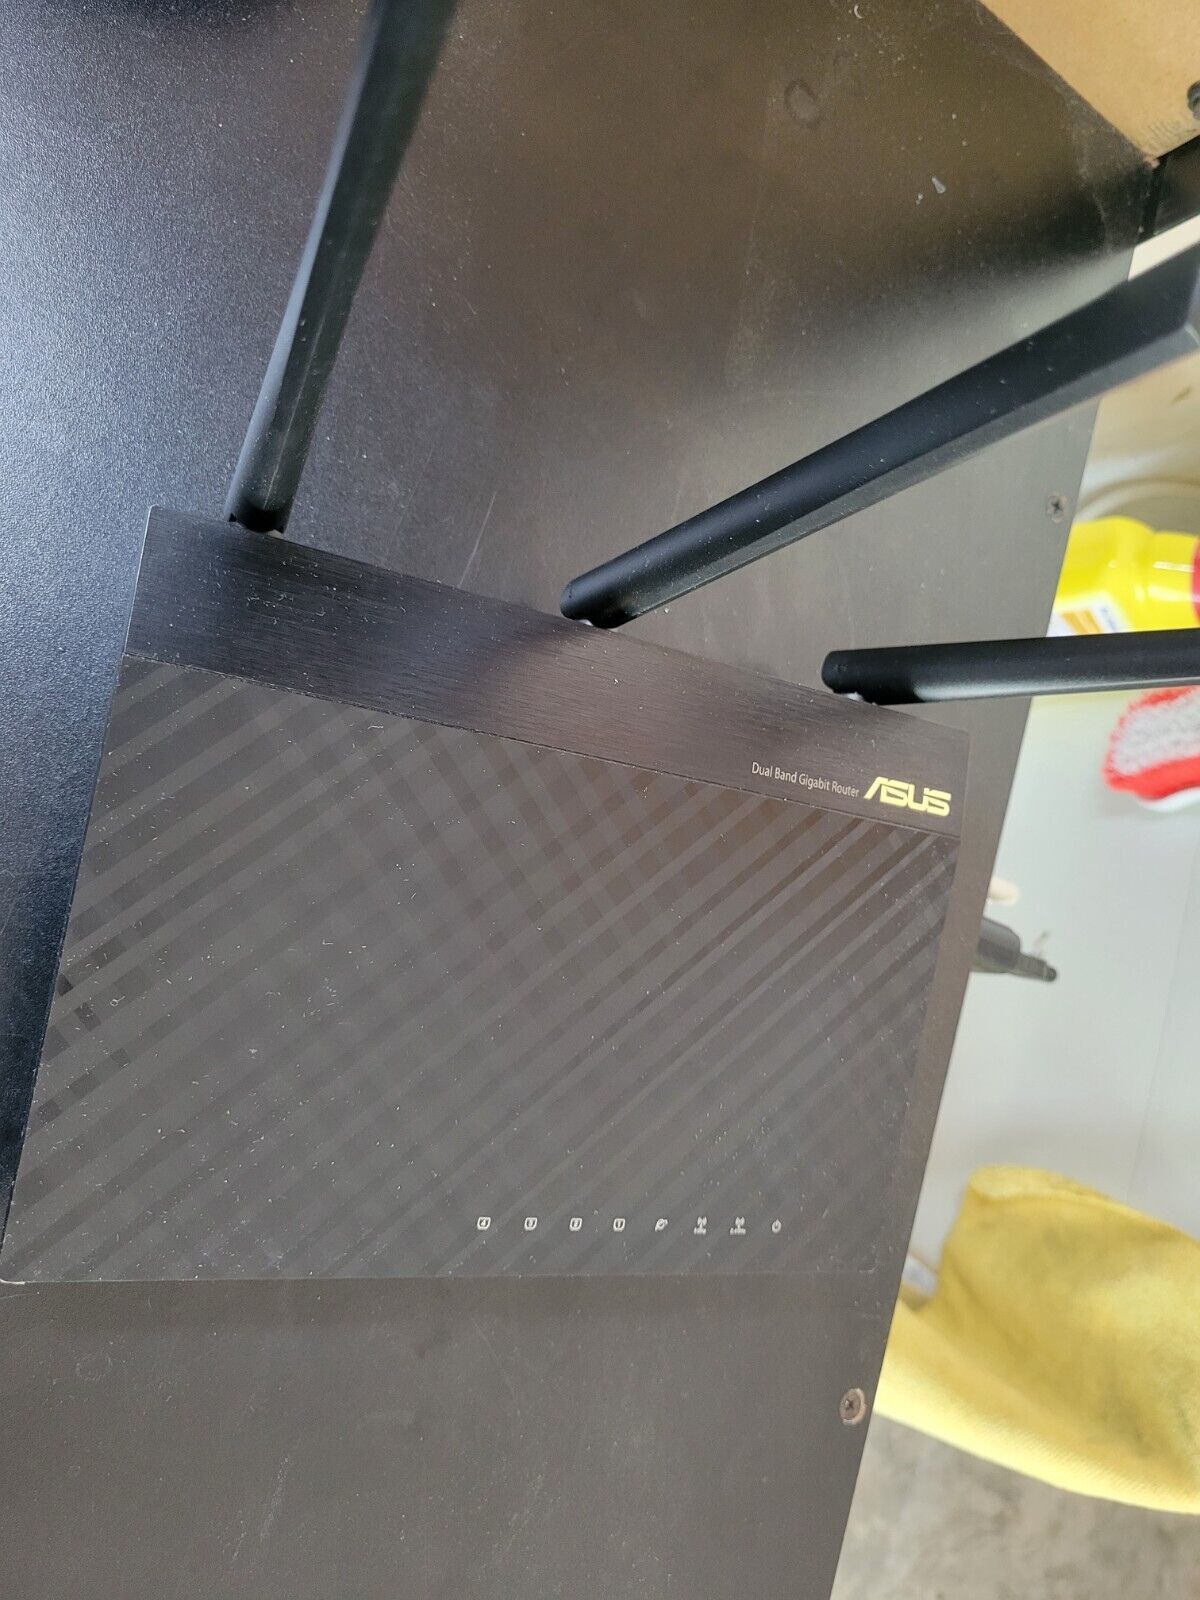 ASUS RT-AC68U AC1900 4 Port Gigabit Wireless AC Router REFURBISHED BY ASUS 